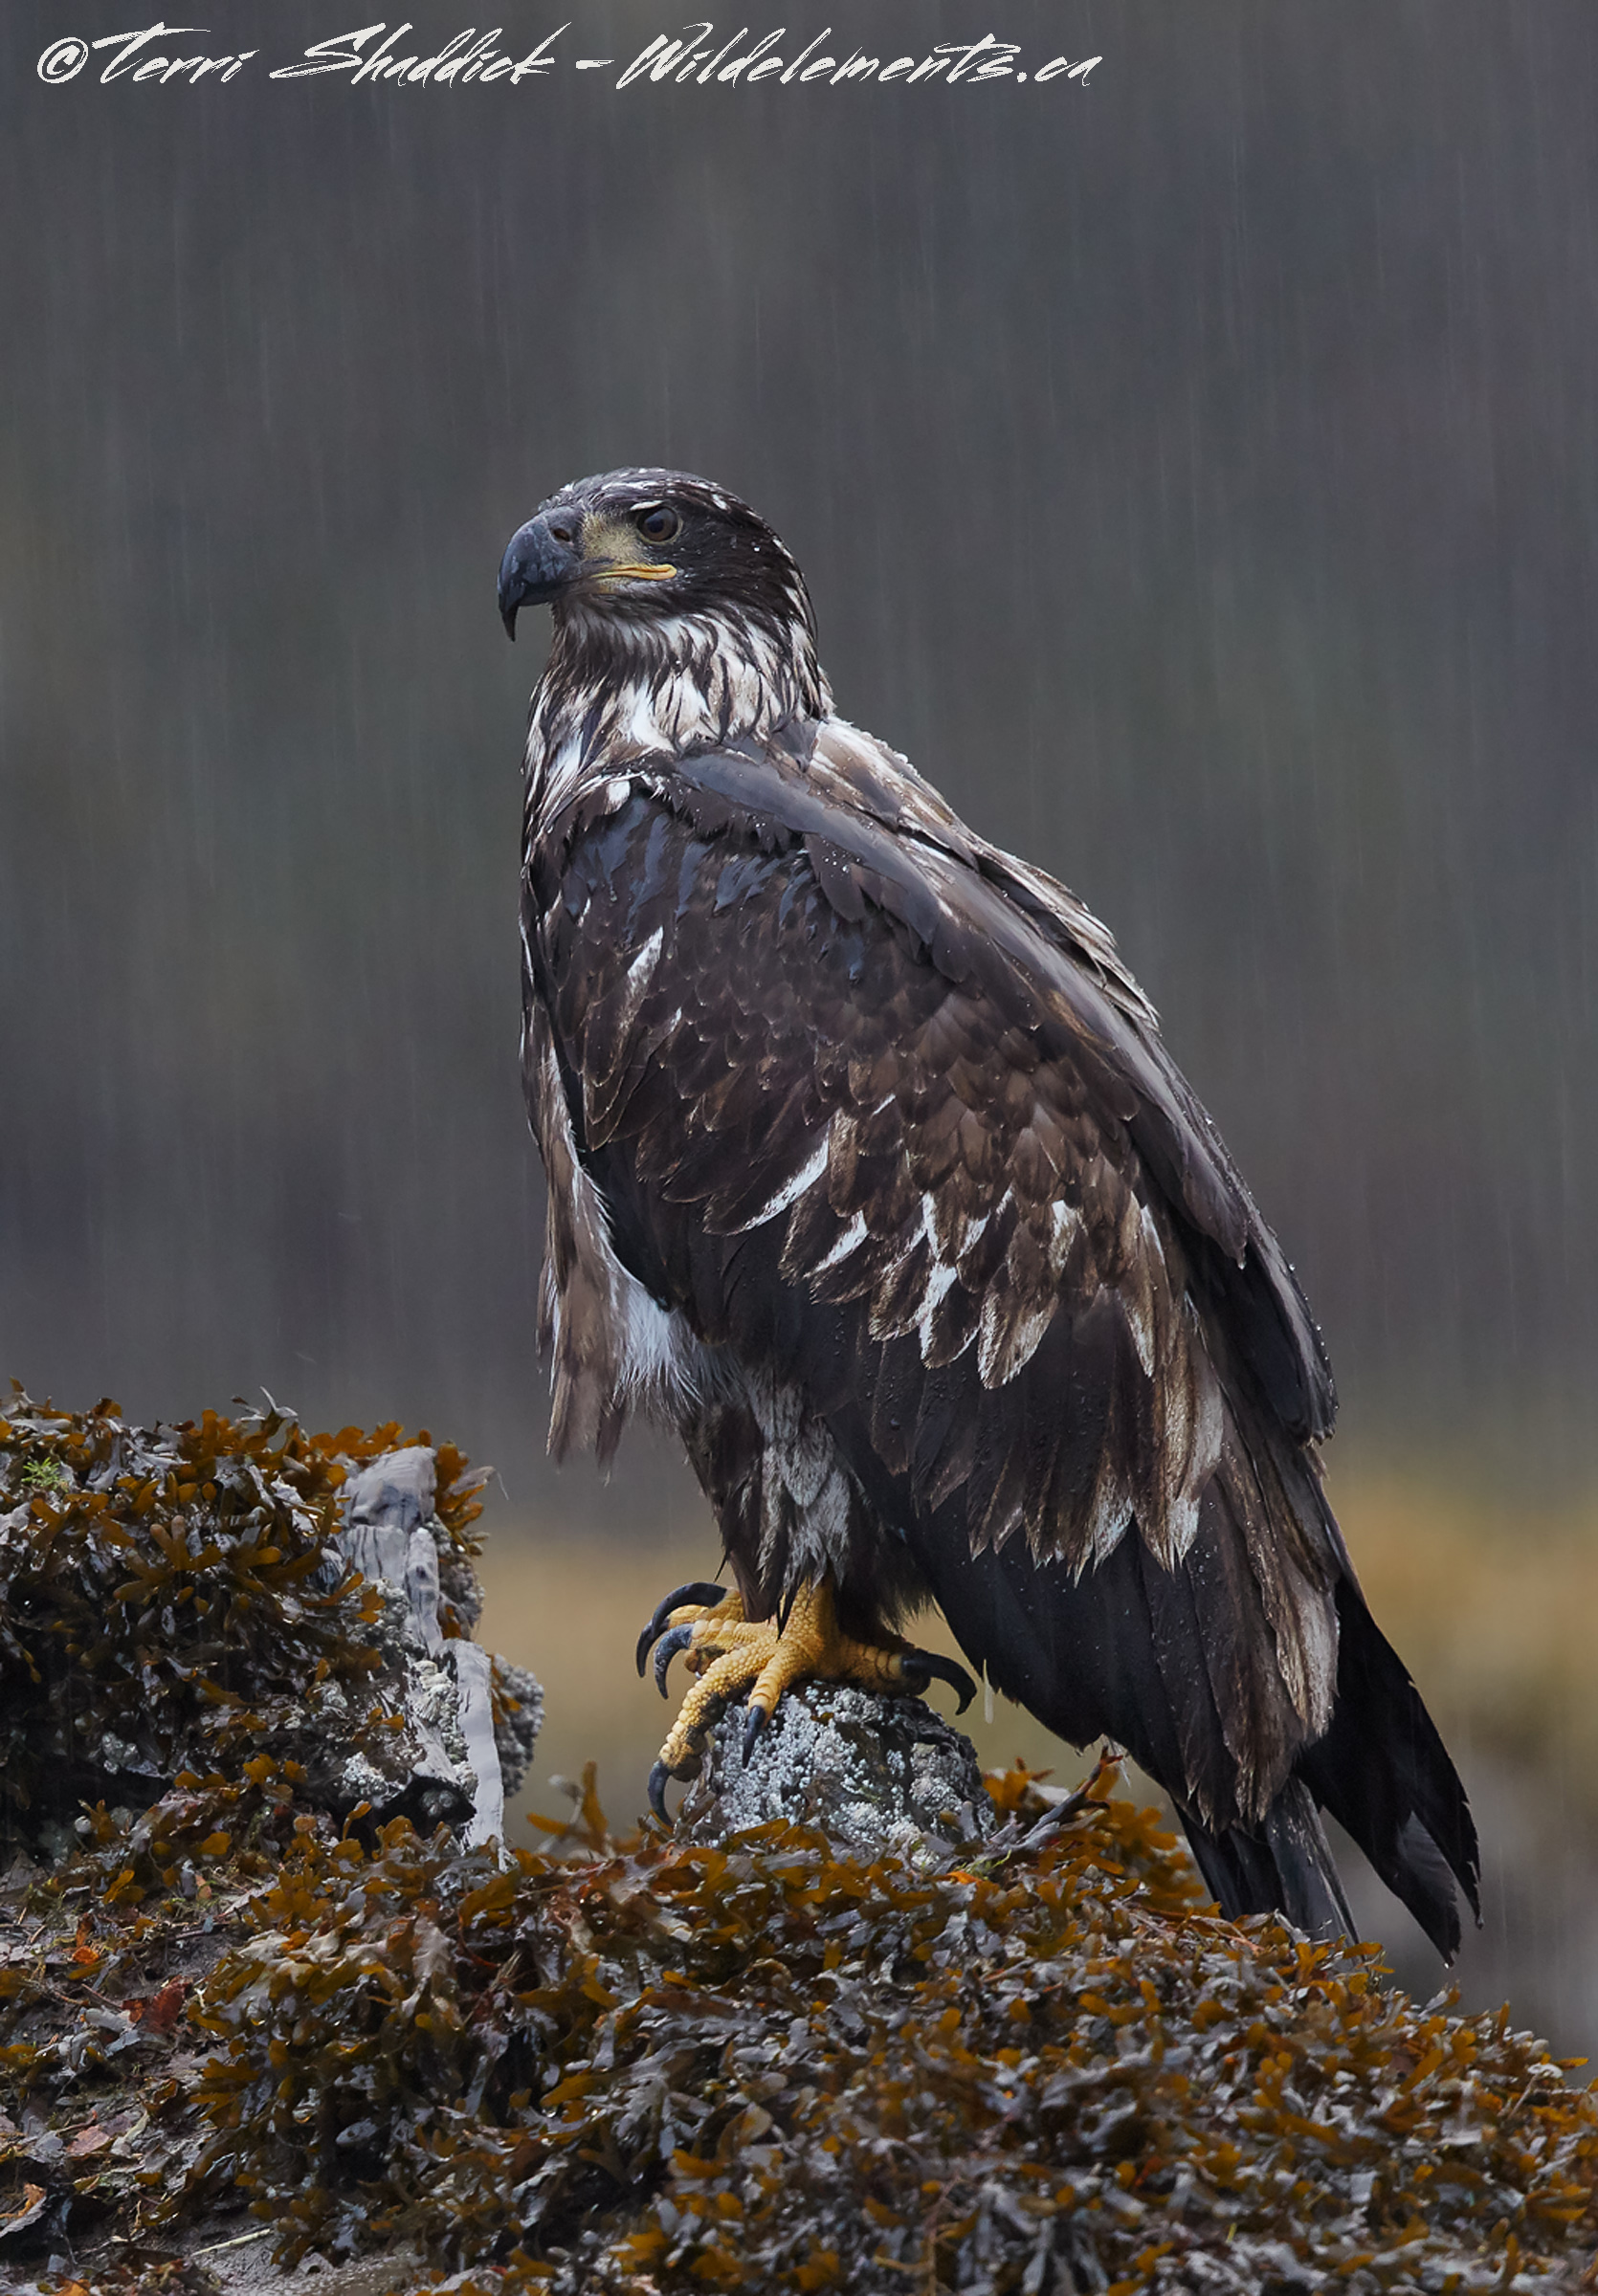 Bald Eagle Perched in Downpour Hurricane